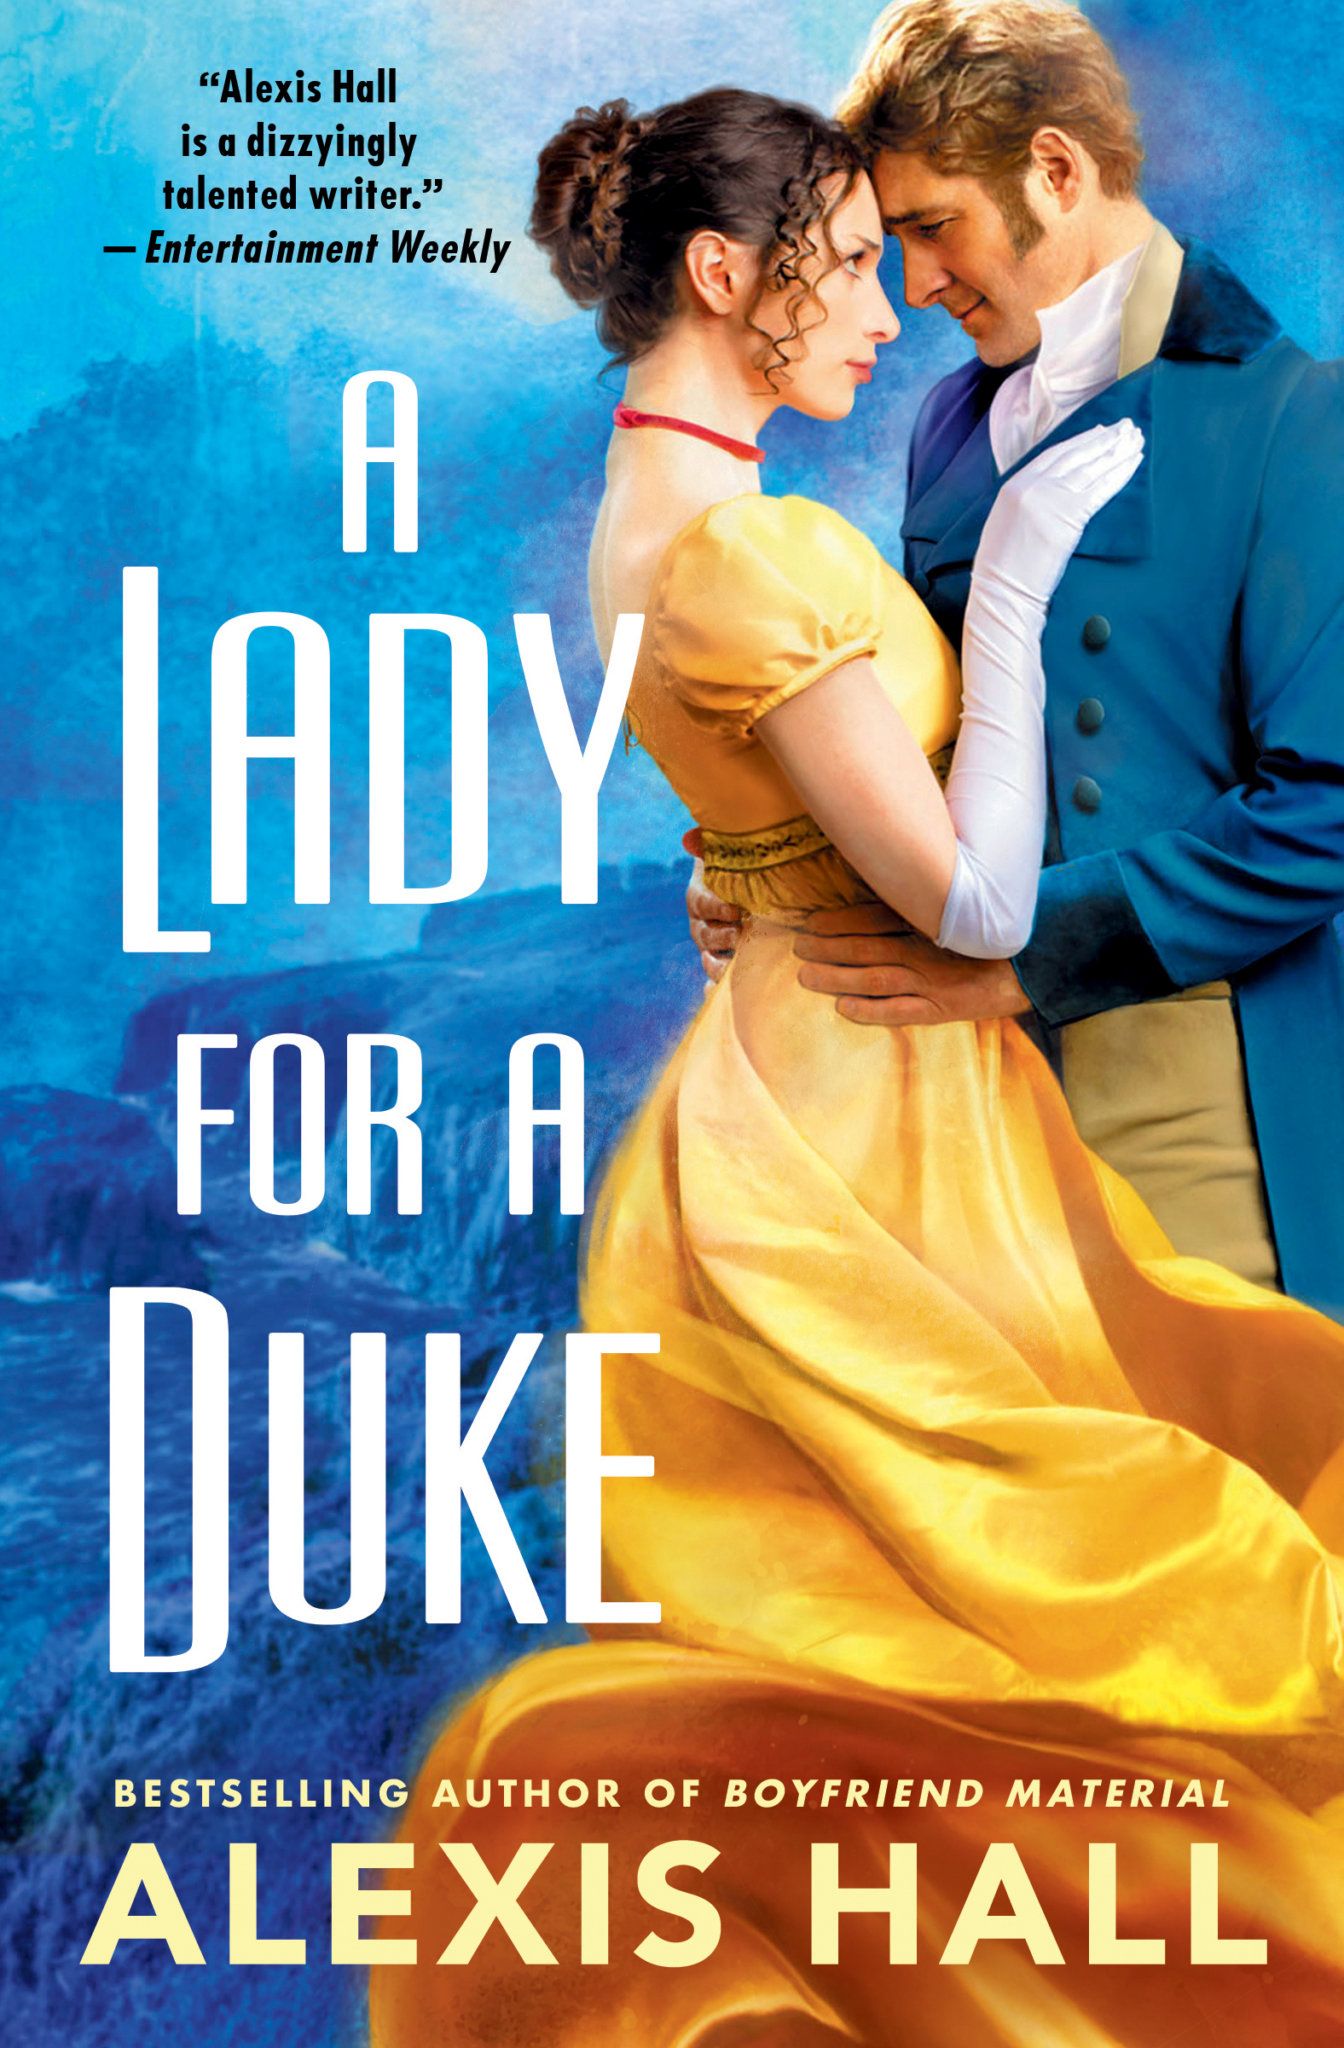 Cover of A Lady for a Duke by Alexis Hall